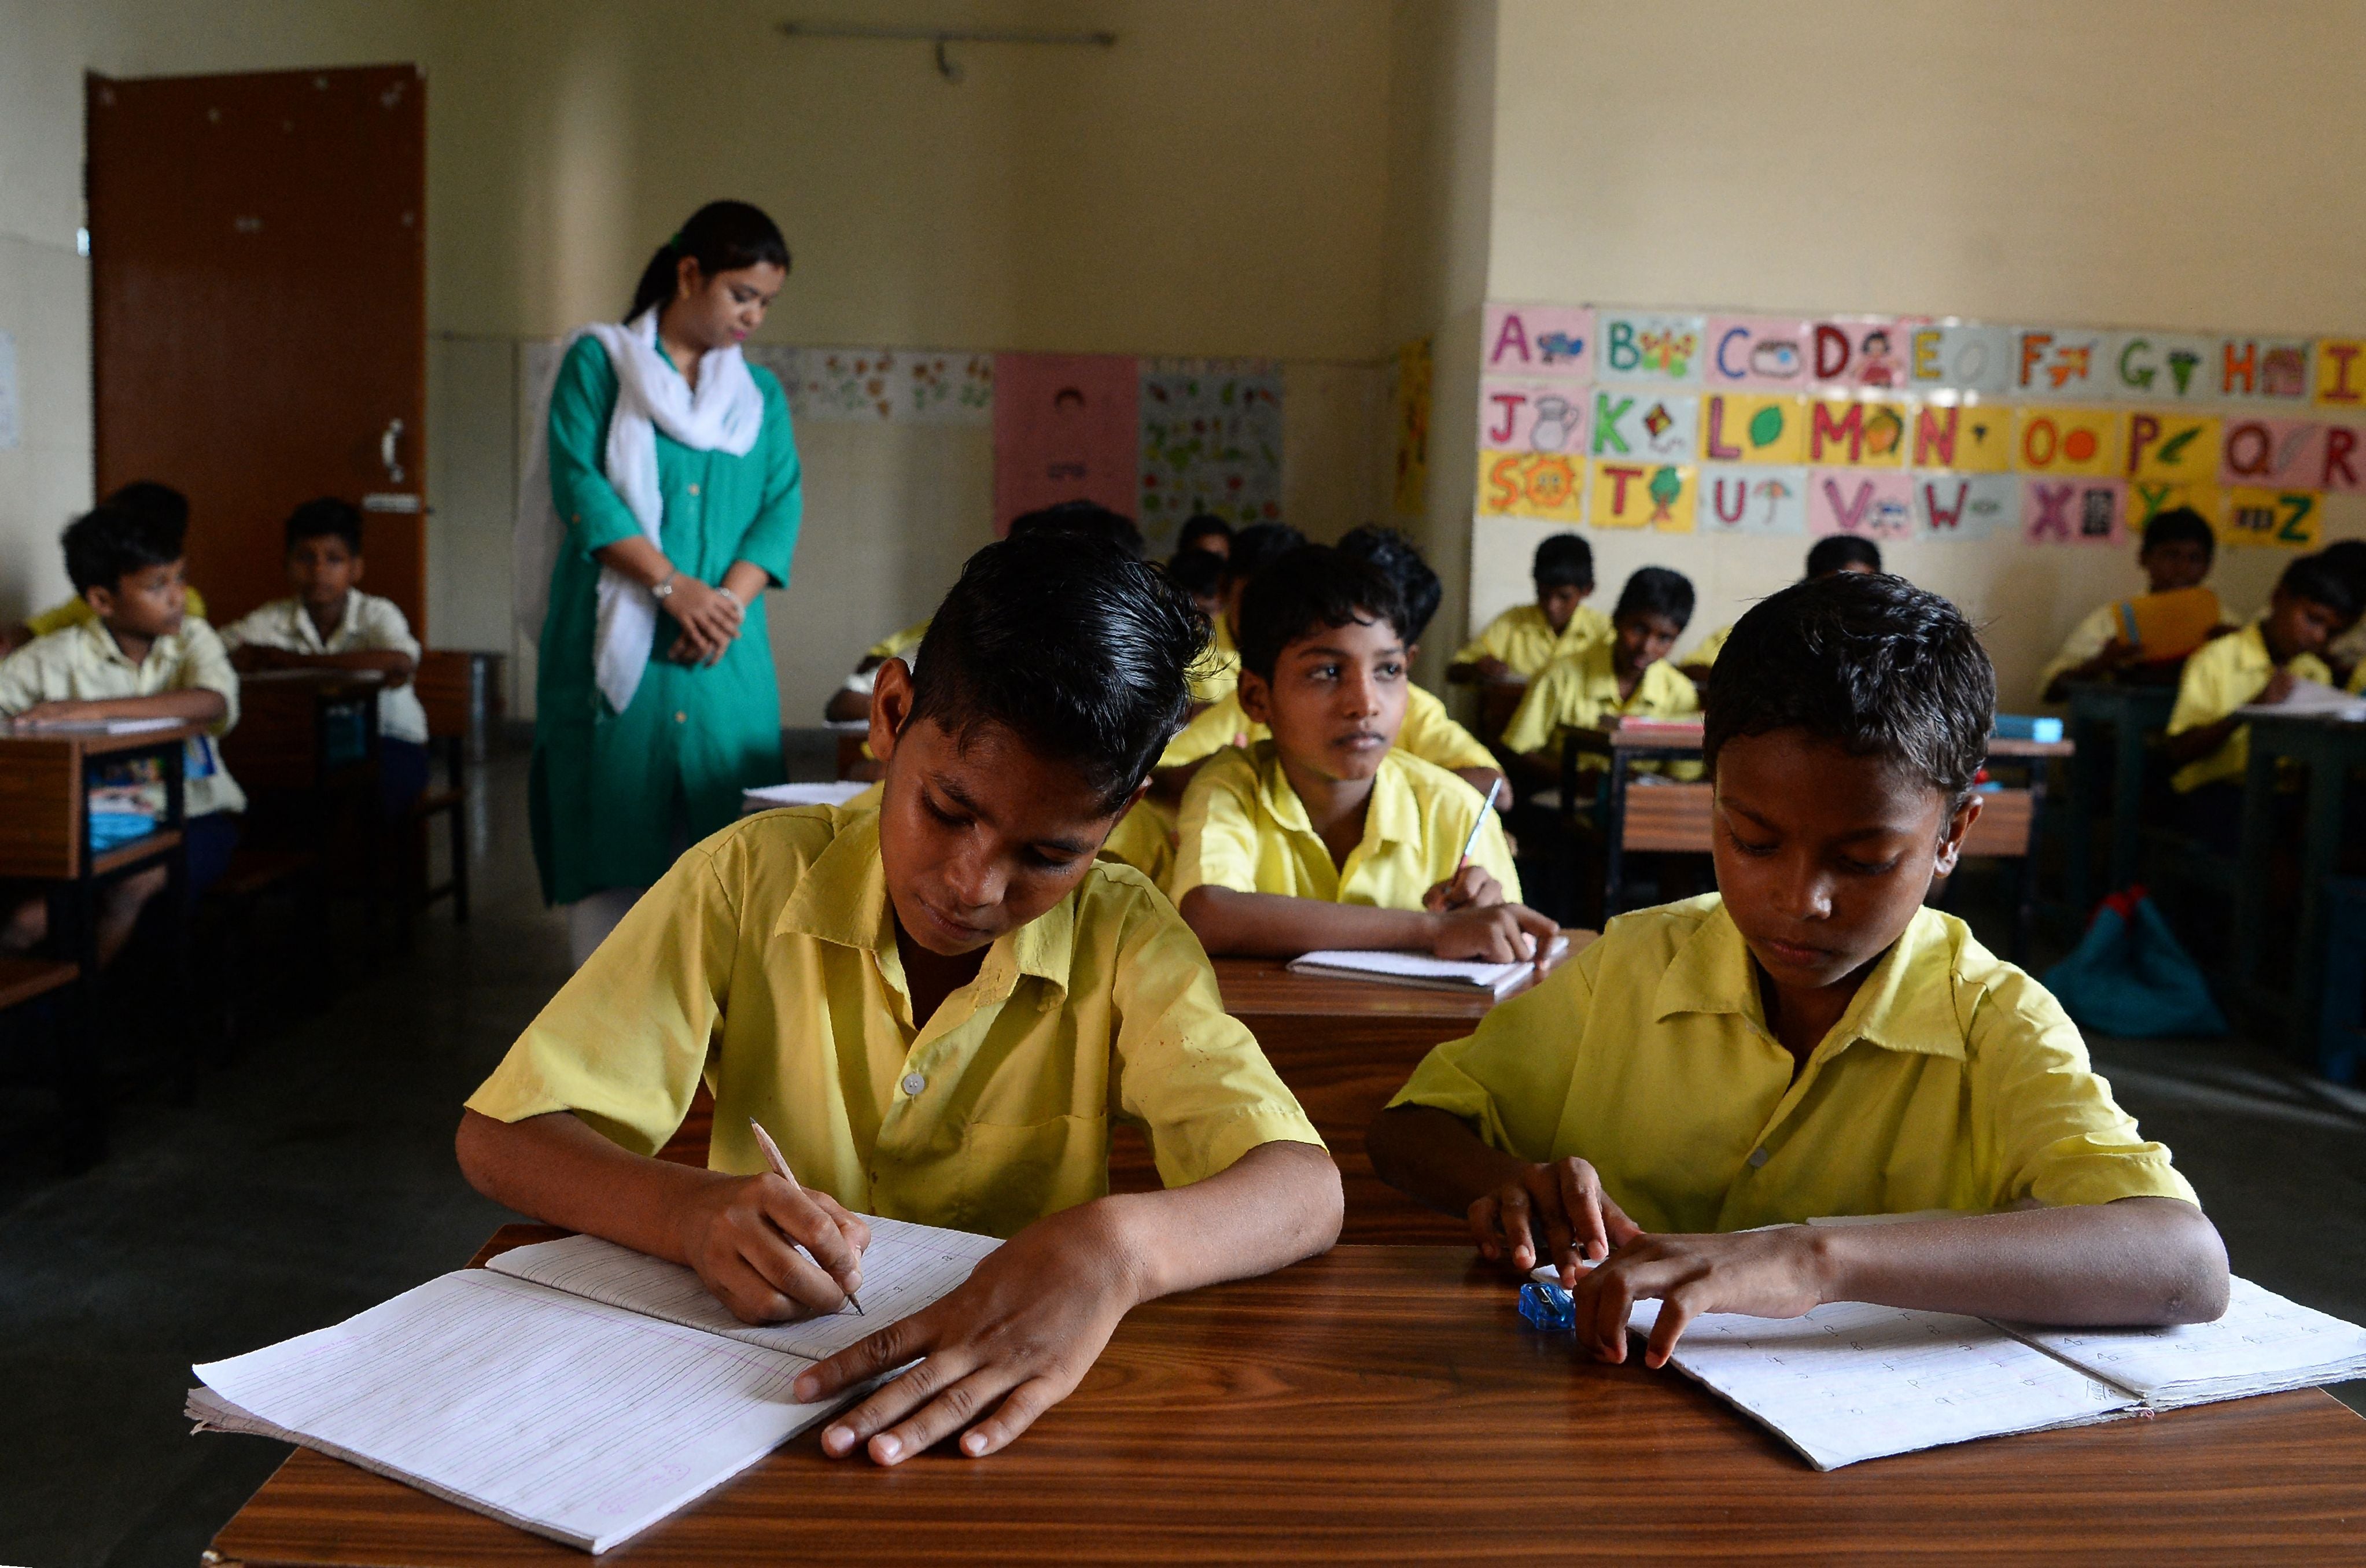 This photograph taken on 18 August 2017 shows young members of the Musahar community studying in a classroom at a school in Gonpura in Bihar